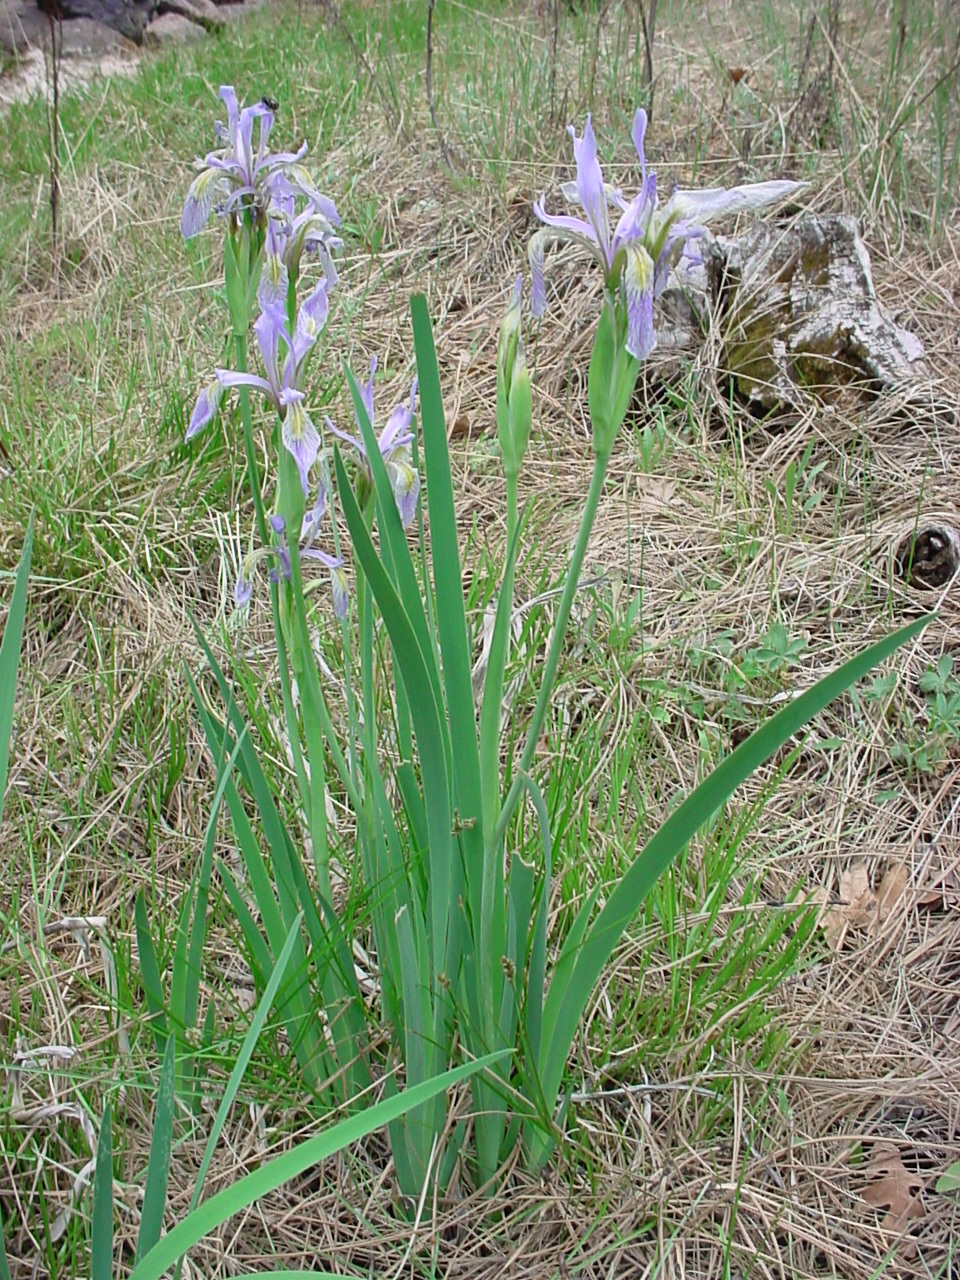 Growth habit in small cluster with bladelike leaves and lavender flowers